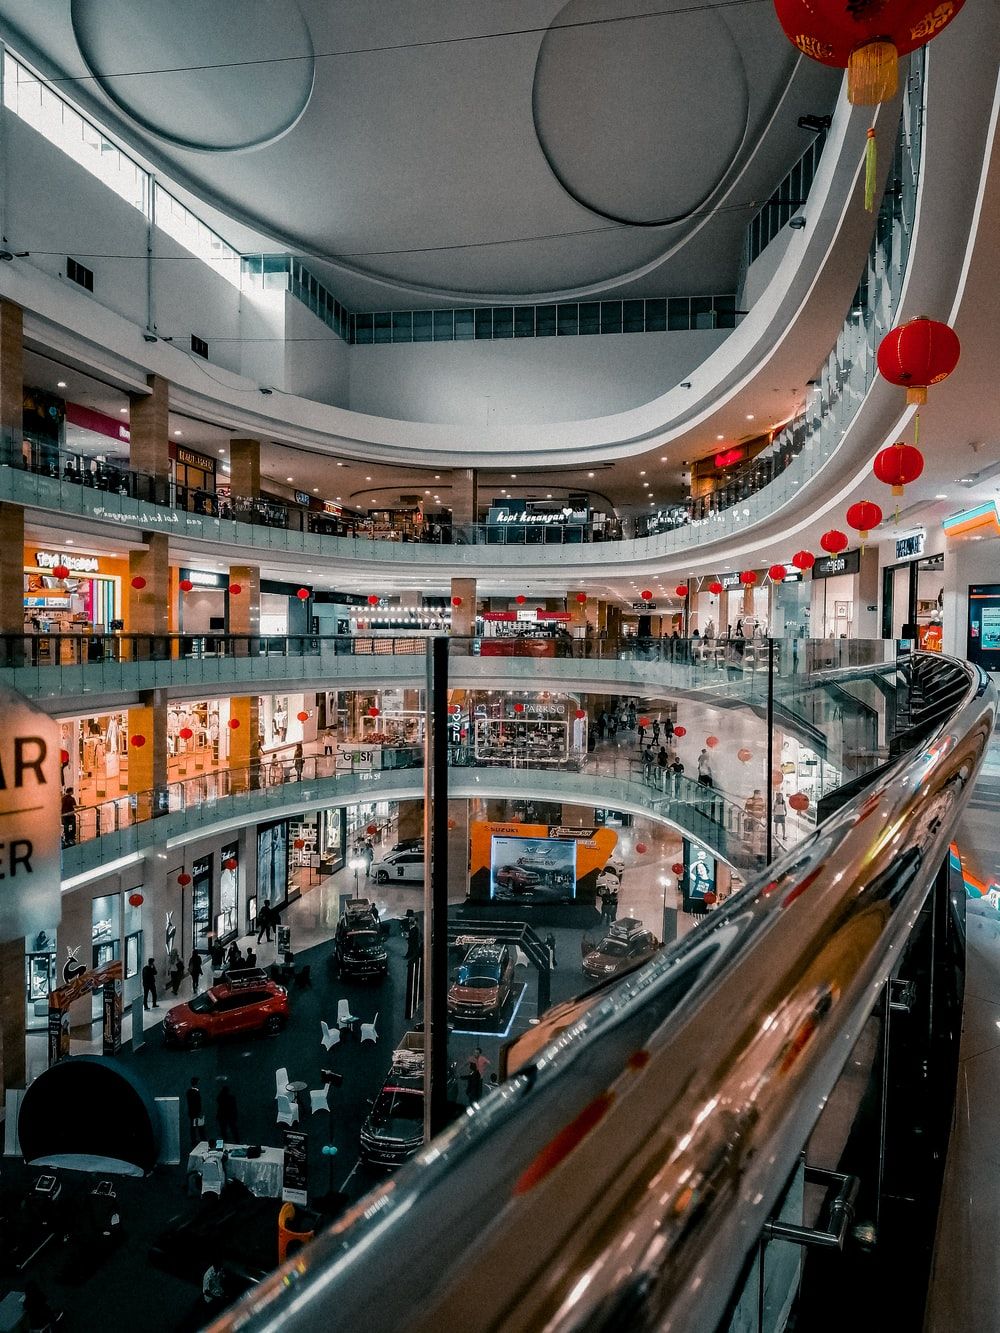 Mall Picture. Download Free Image